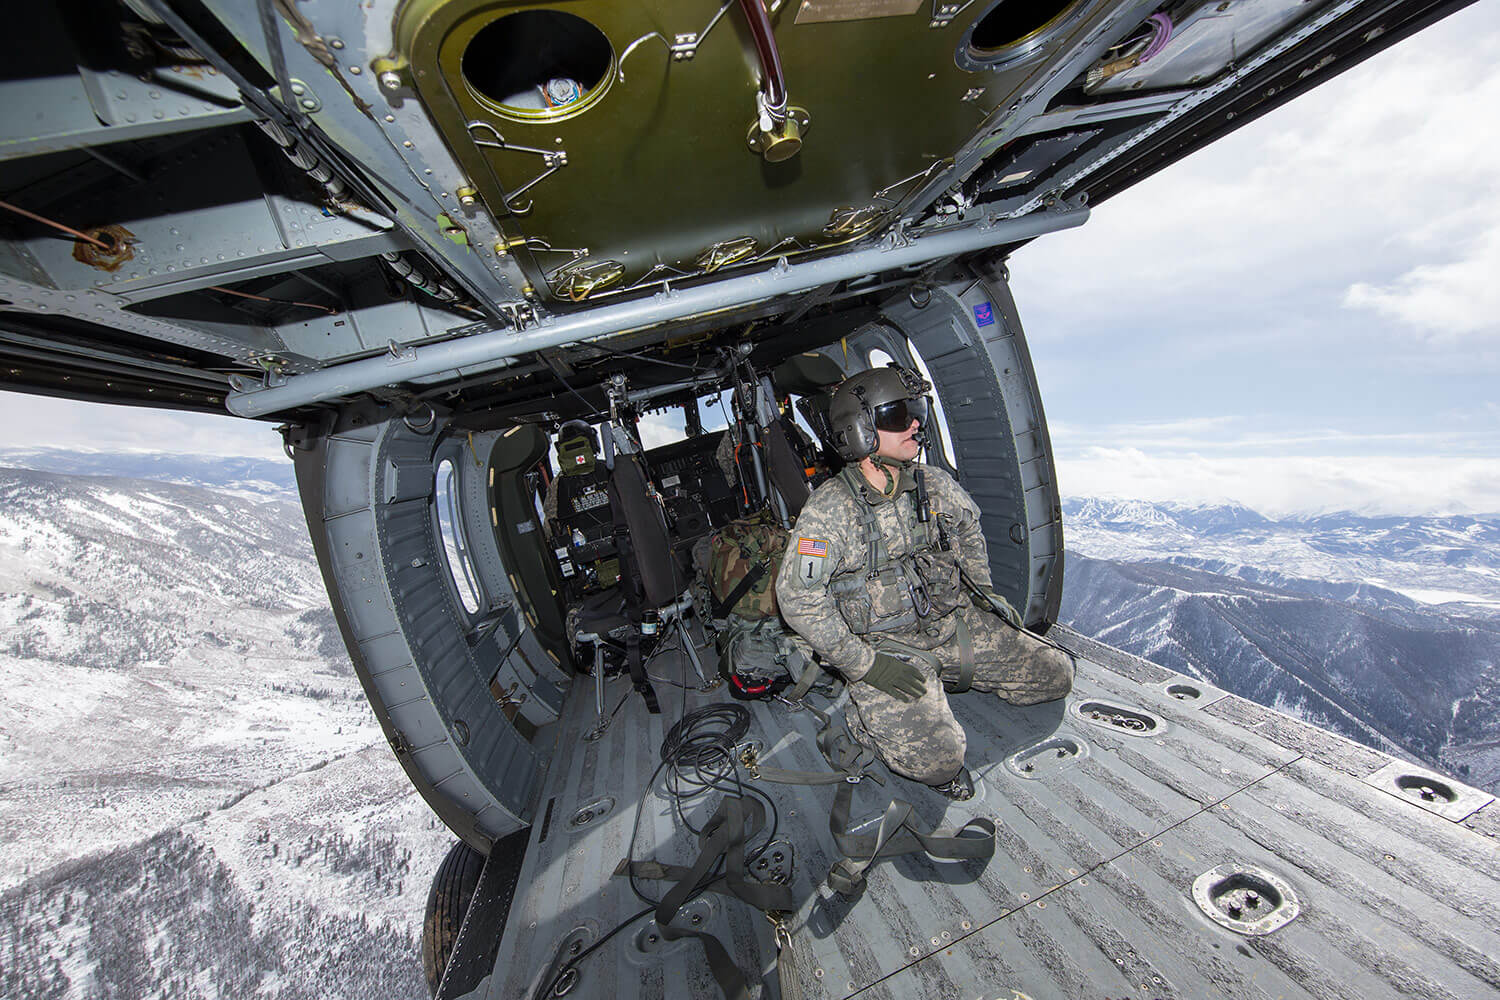 SGT Vincent Lindelin, Colorado Army National Guard, sits in the back of a military helicopter while participating in a High-Altitude Army National Guard Aviation Training Site (HAATS) course. Run by full-time Colorado Army National Guard pilots, HAATS is specifically designed to train military rotary-wing pilots and offers a unique training methodology based on aircraft power that is designed to dramatically increase individual and crew situational awareness. Photo courtesy Frank Crebas